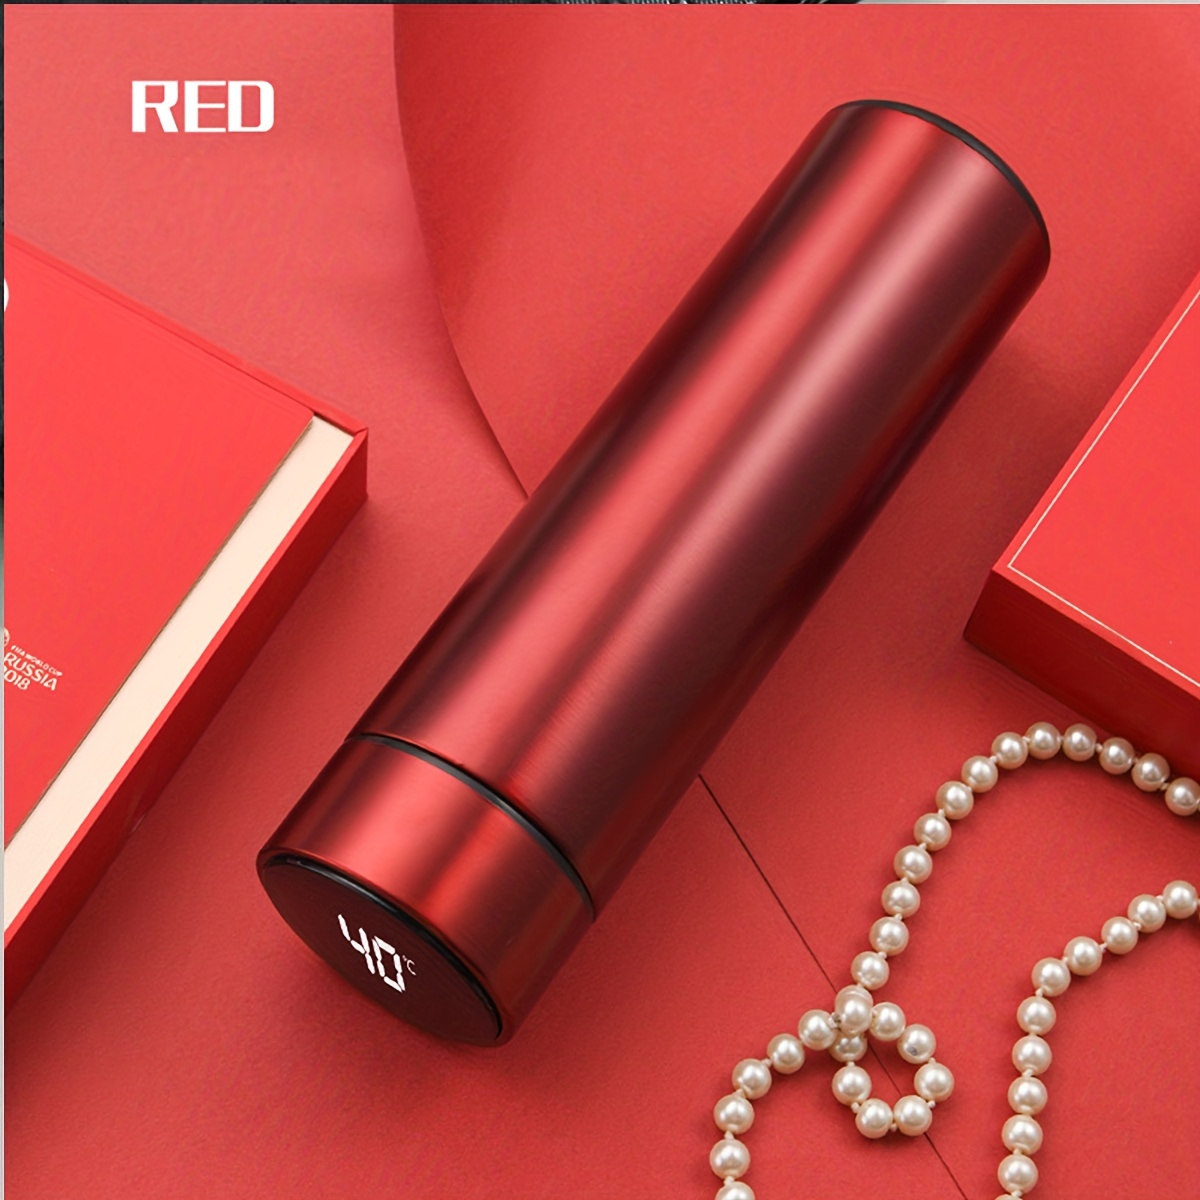 LED Temperature Display Stainless Steel Insulated Touch Thermal Water Bottle